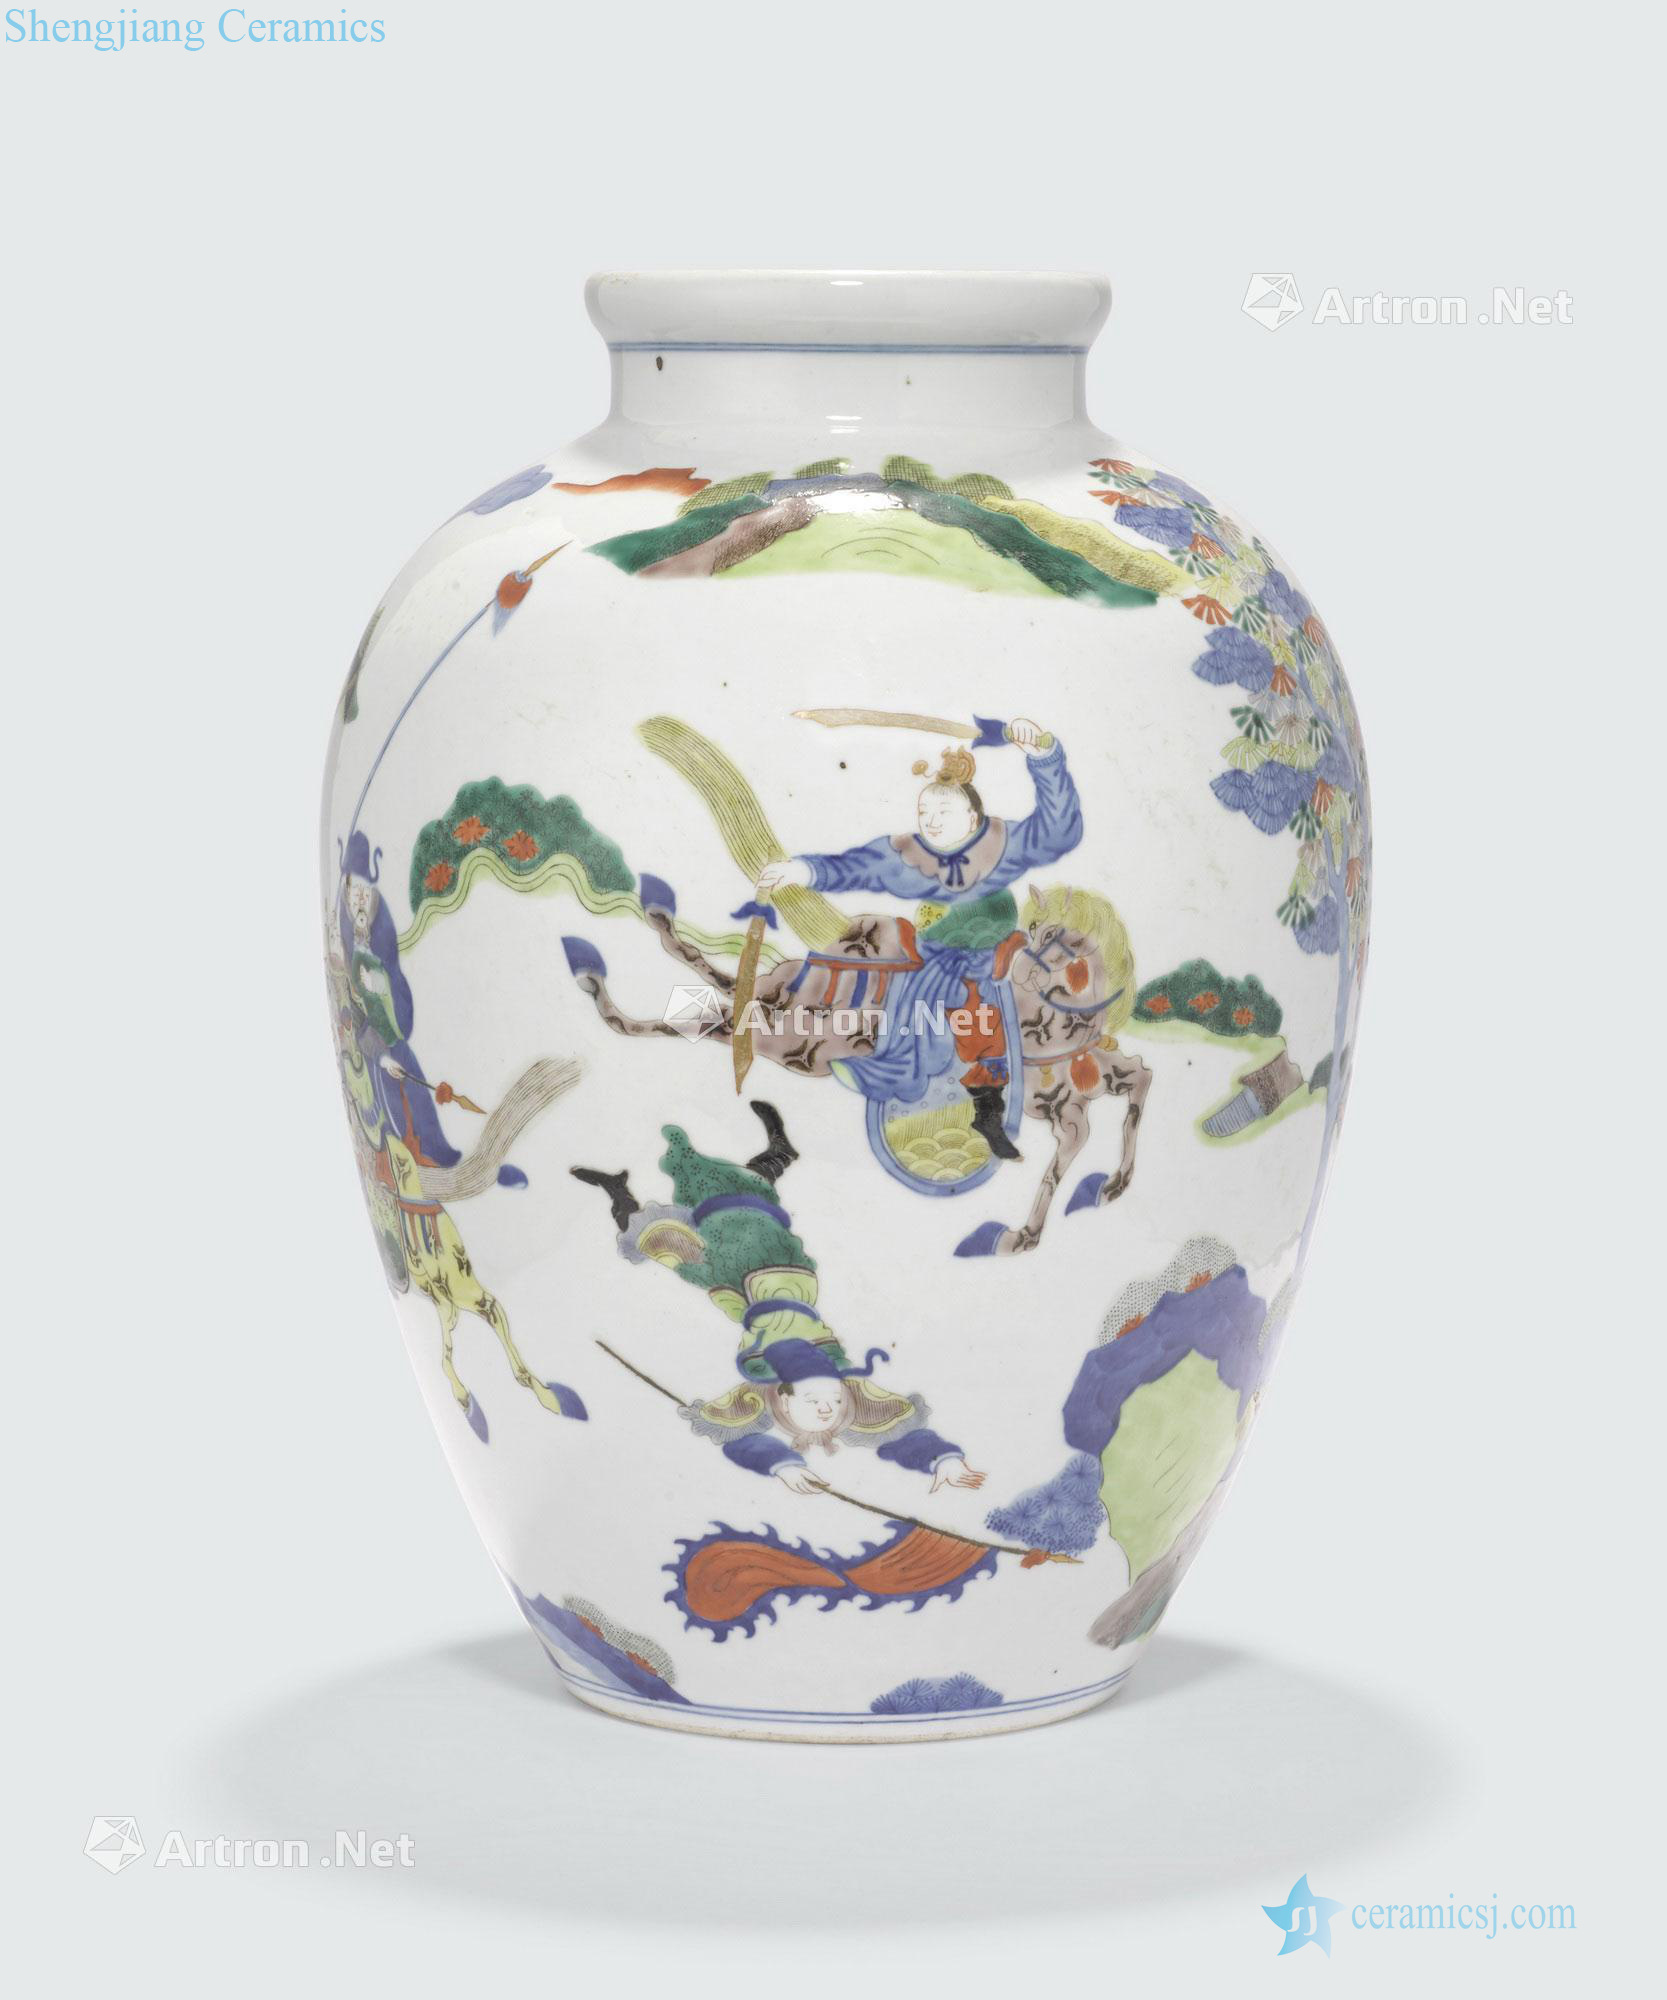 The newest the Qing/Republic period A WUCAI ENAMELED OVOID JAR